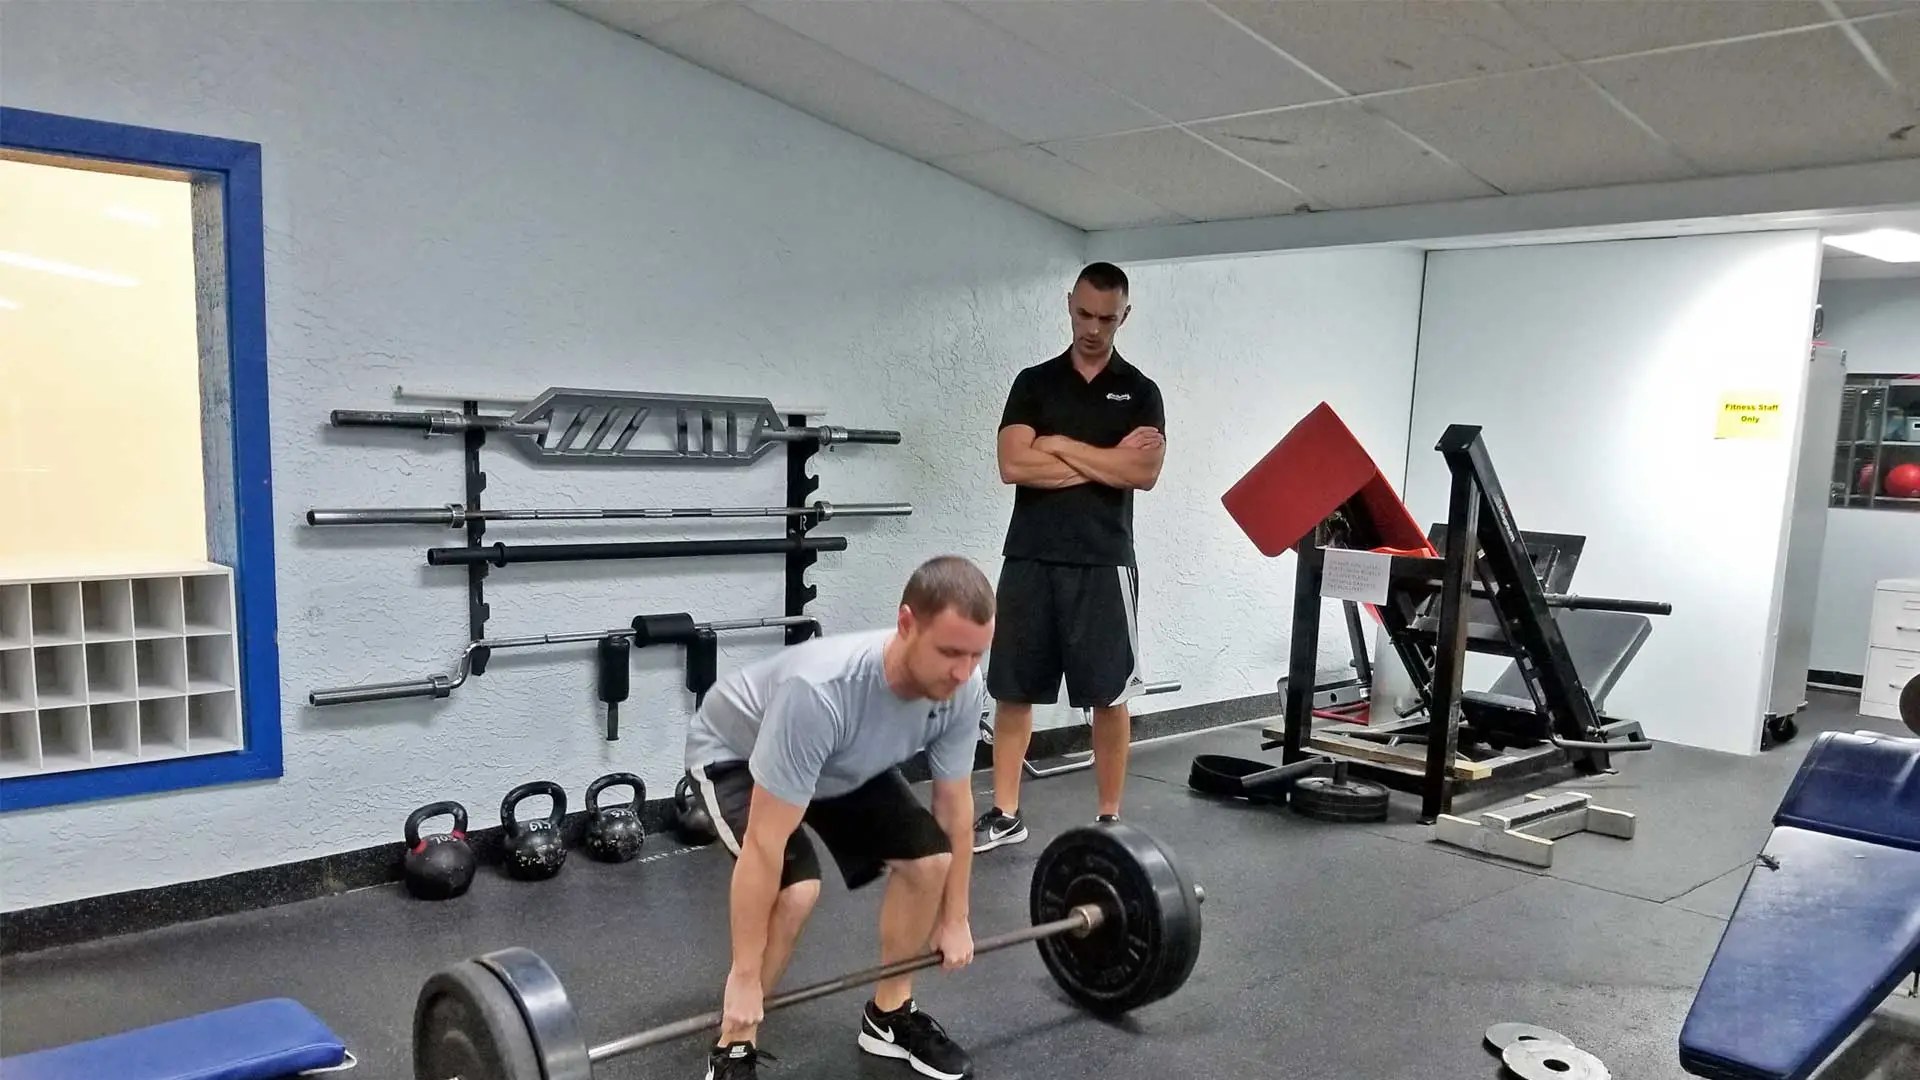 Francois founder of FastTwitch Fitness Performance training a client on how to do a proper dead lift in Apollo Beach